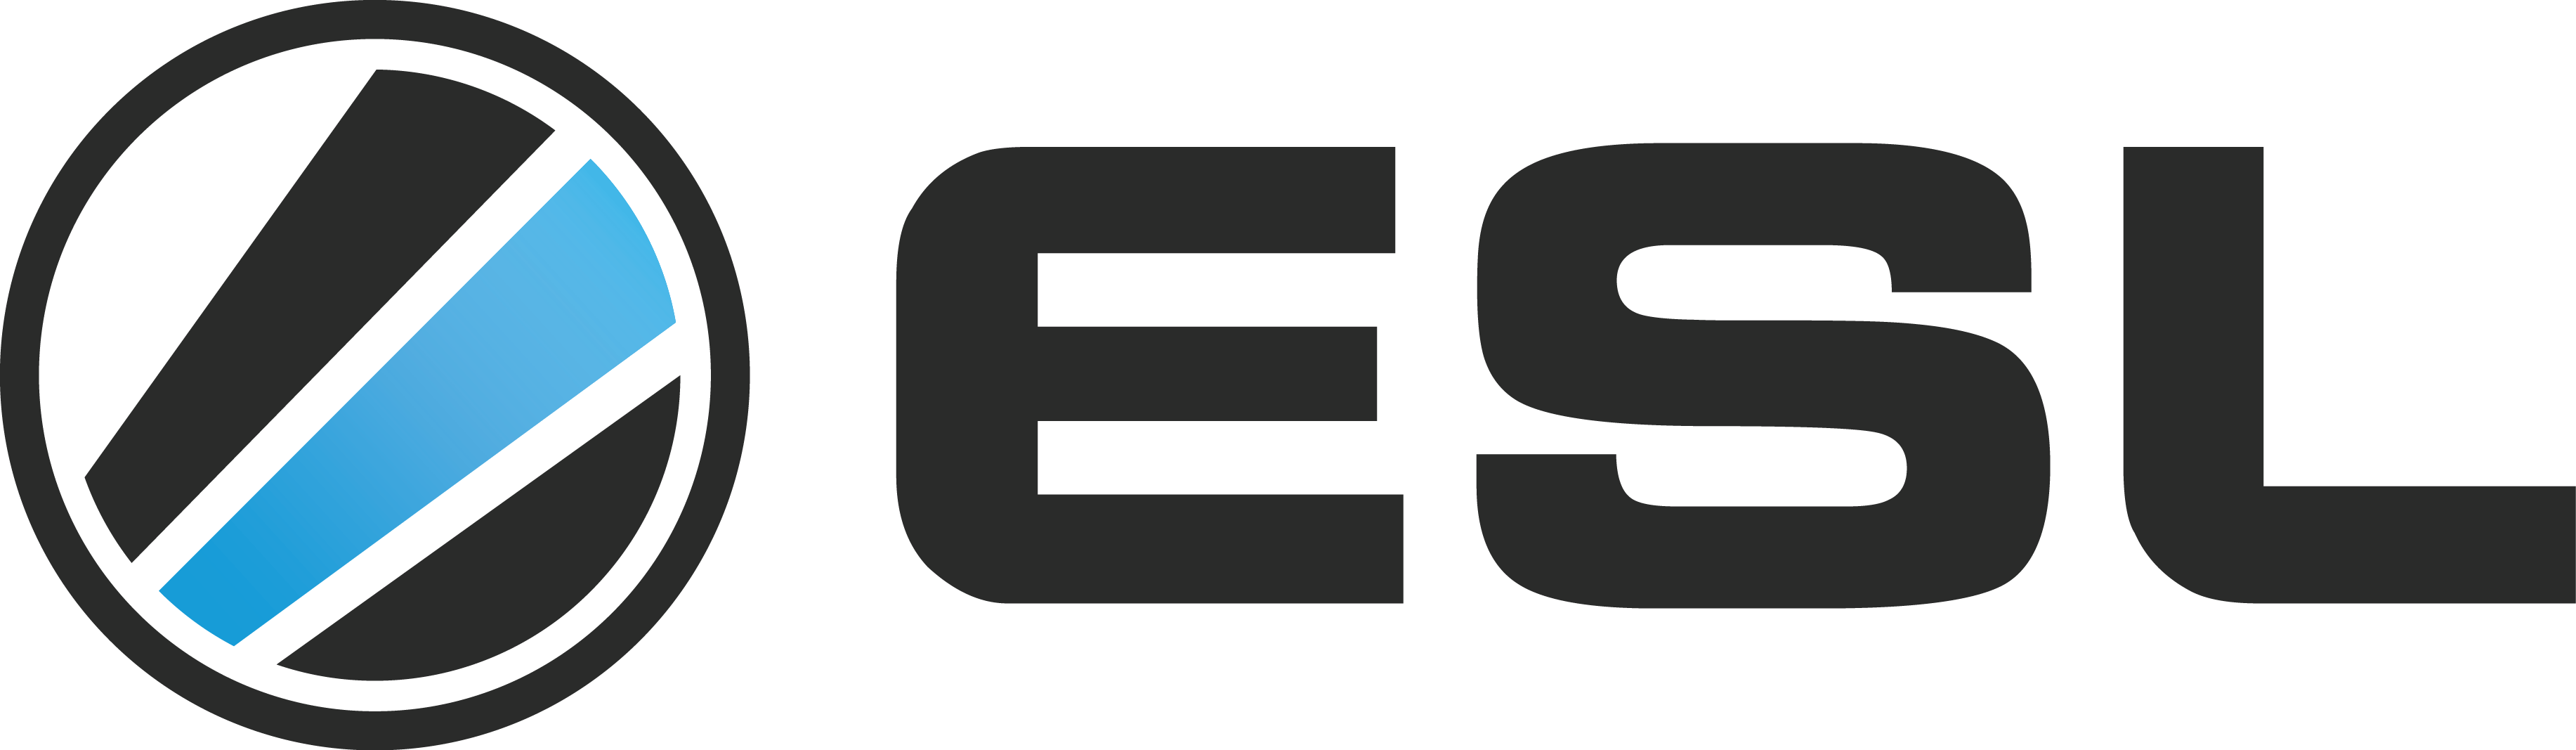 The World's Largest Esports Company, Esl, Is Happy - Esl Logo Png (3667x1067)